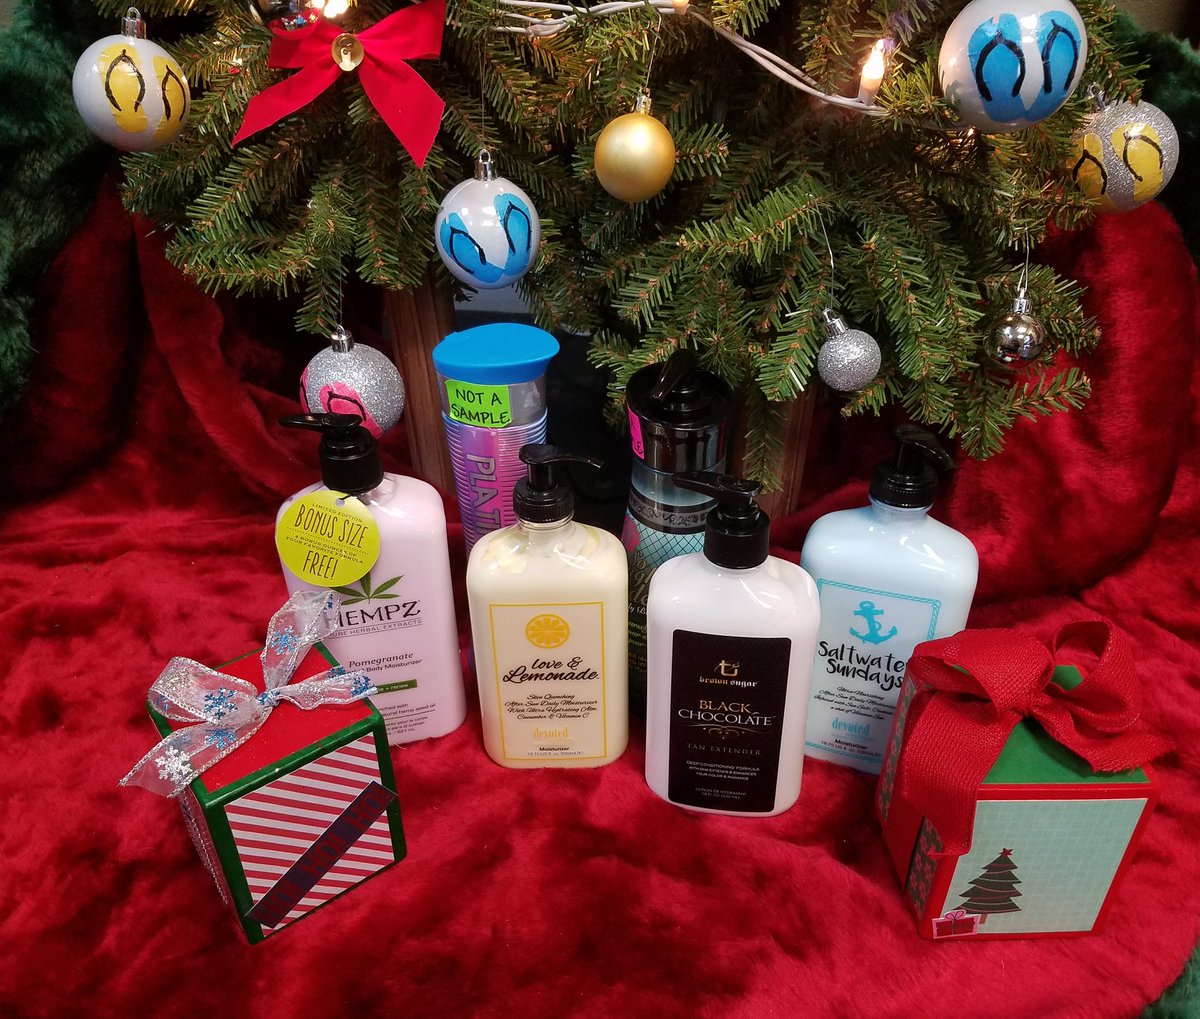 Tis the season!
Who else wants a fabulous smelling moisturizer for Christmas?
Let your significant other know to stop by and pick you up one. 
#bronzeon #moisturizedaily #skinwillbesoft